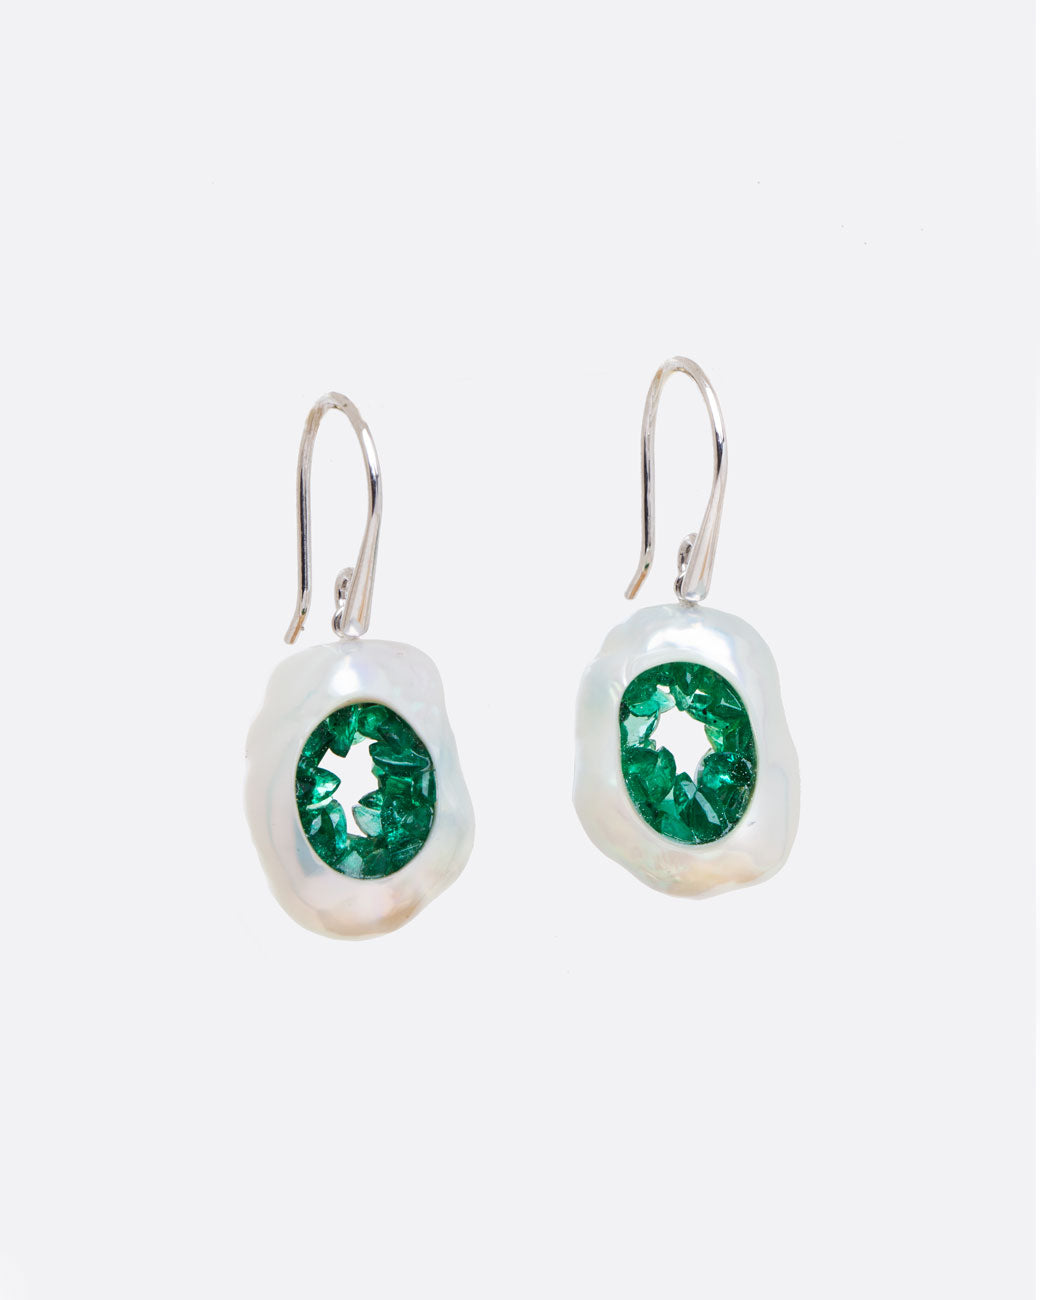 two dangle hook earrings in white gold hanging and viewed from the front. the dangle part is a pearl that has had a hole carved out in the middle and then lined with emeralds, to create a geode like appearance.